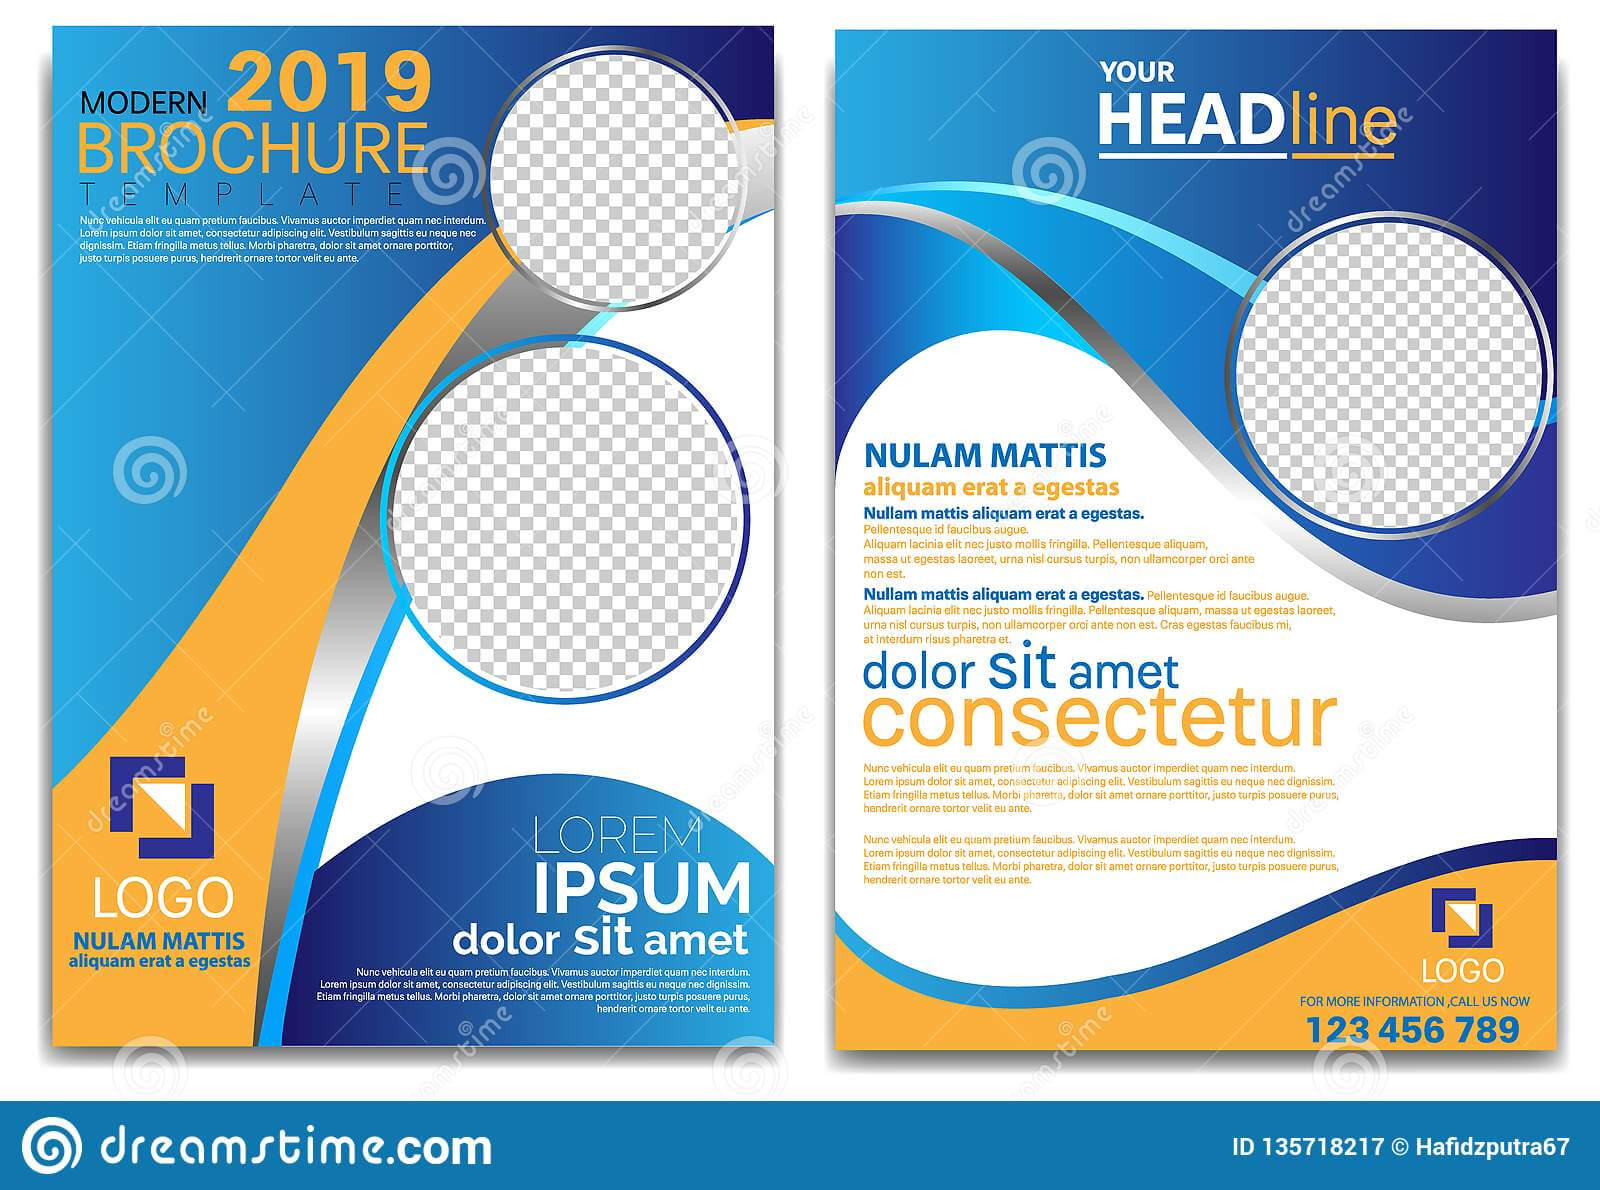 Modern Brochure Template 2019 And Professional Brochure With School Brochure Design Templates